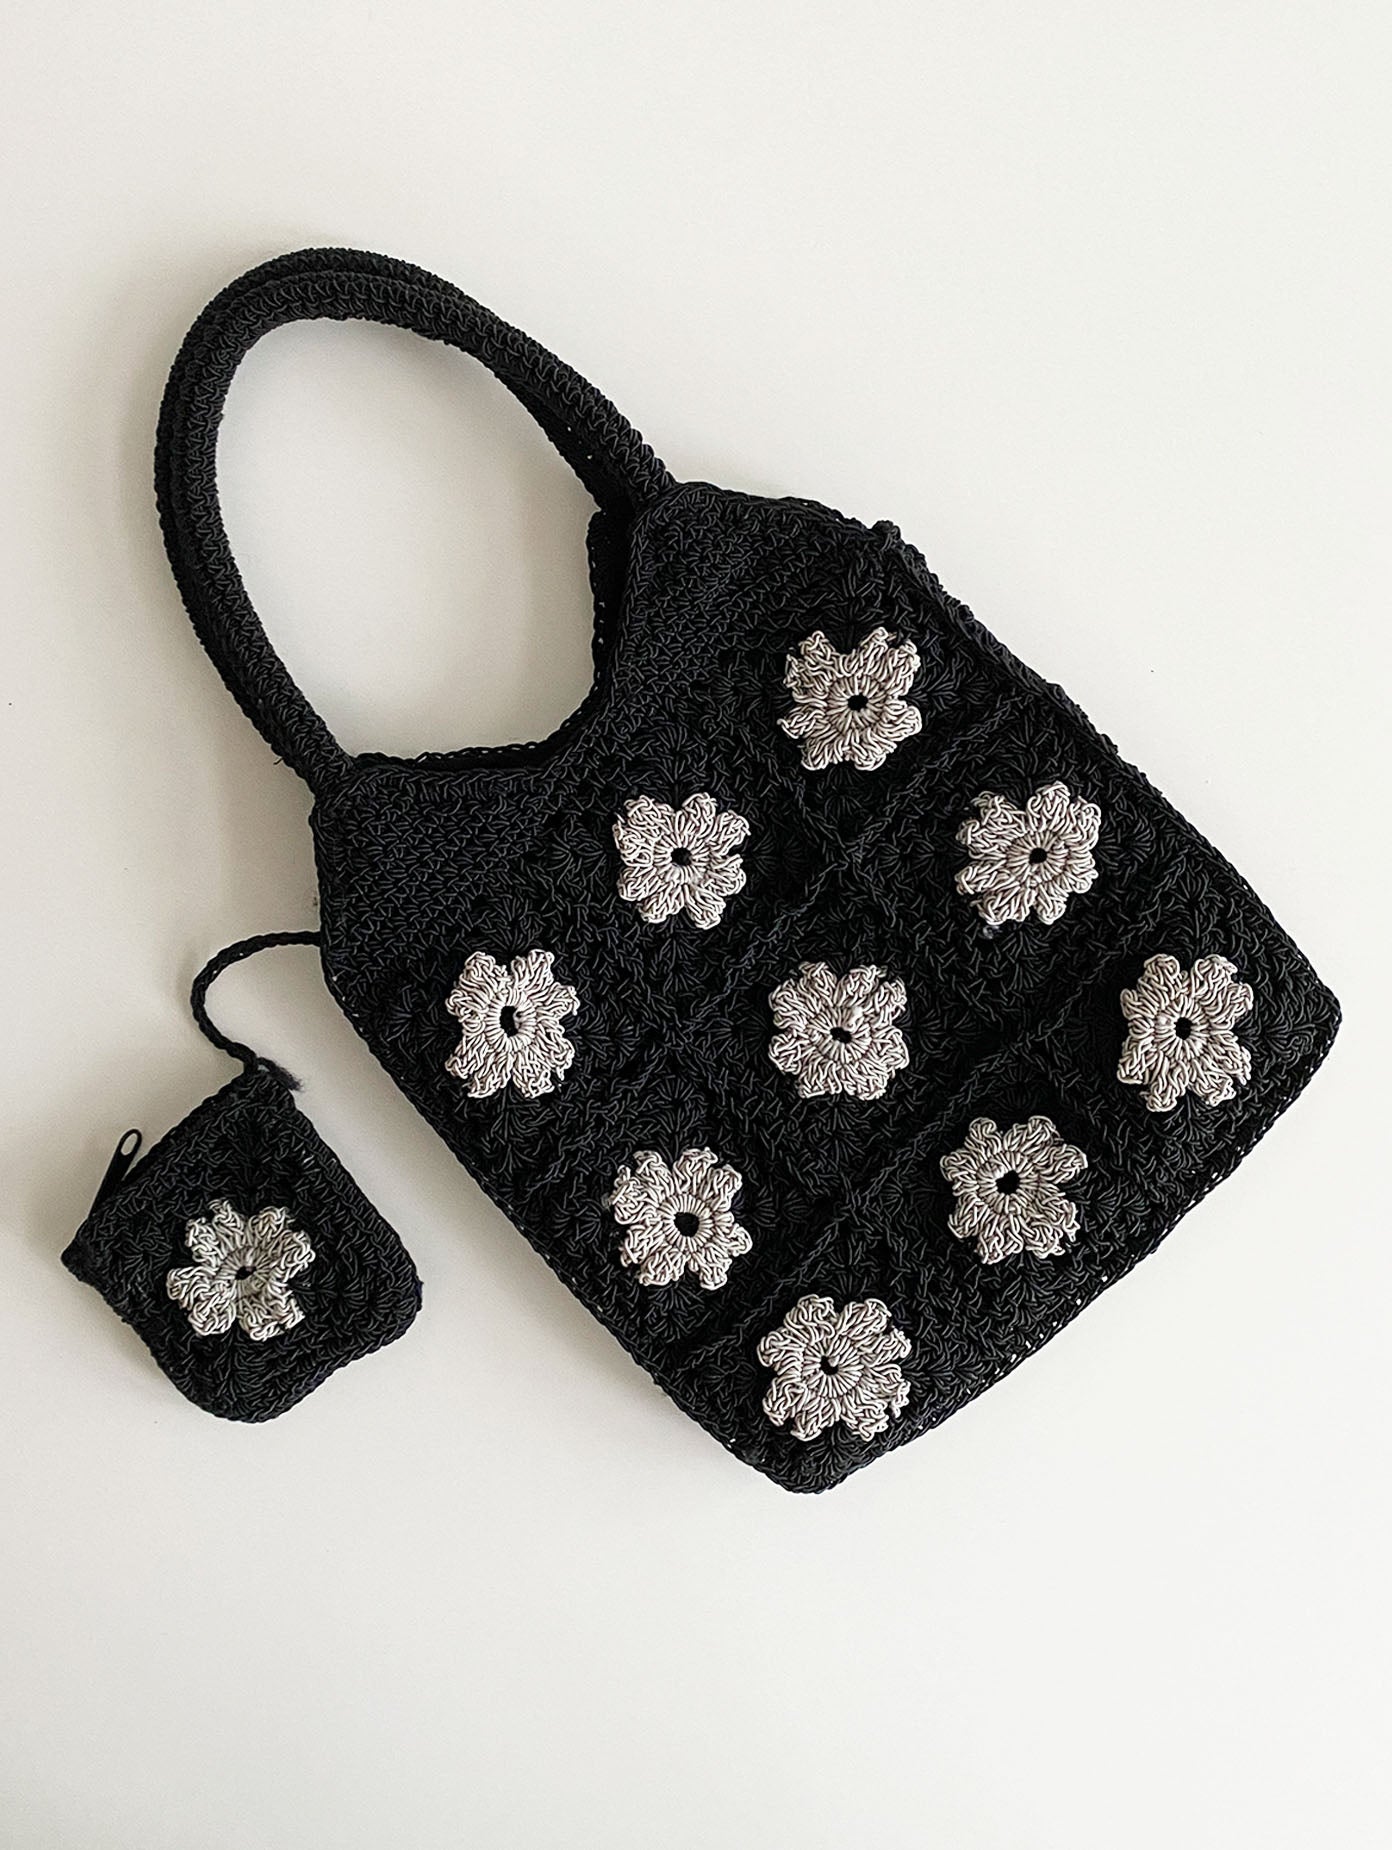 Black and Gray Flower Knit Bag With Coin Purse